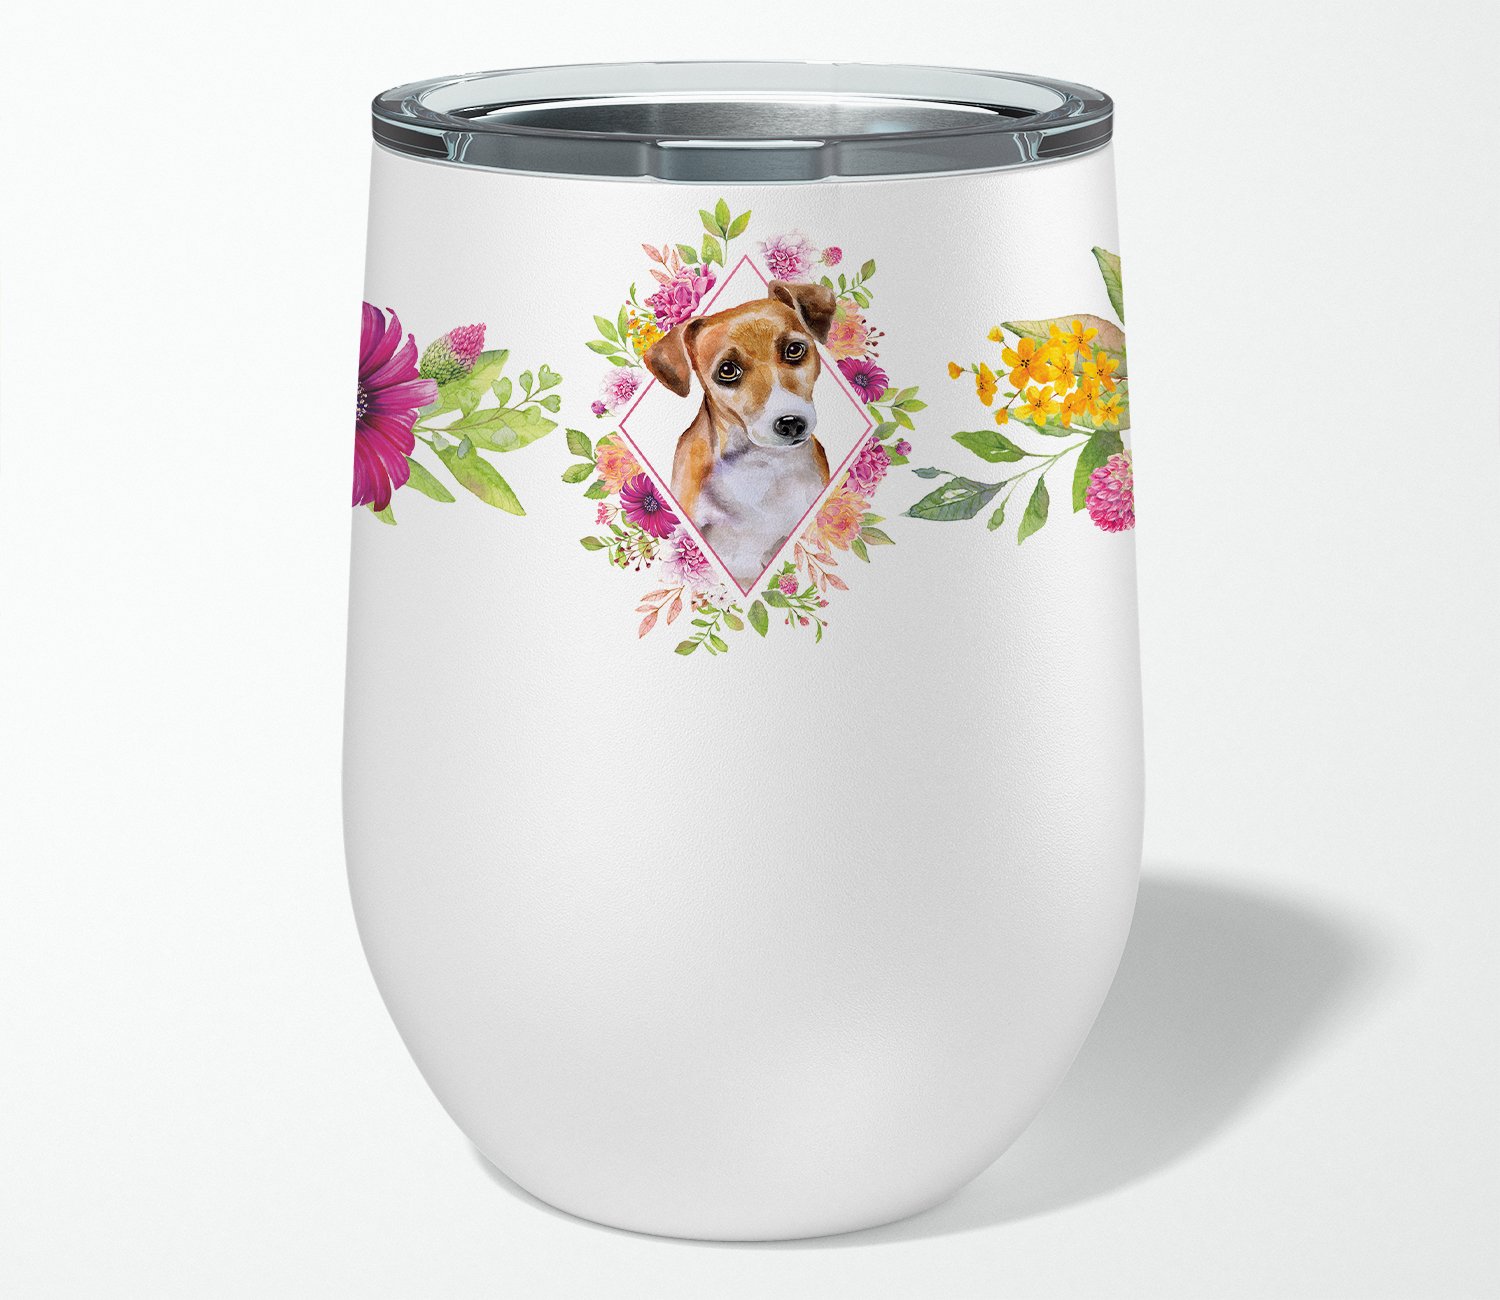 Jack Russell Terrier #1 Pink Flowers Stainless Steel 12 oz Stemless Wine Glass CK4155TBL12 by Caroline's Treasures